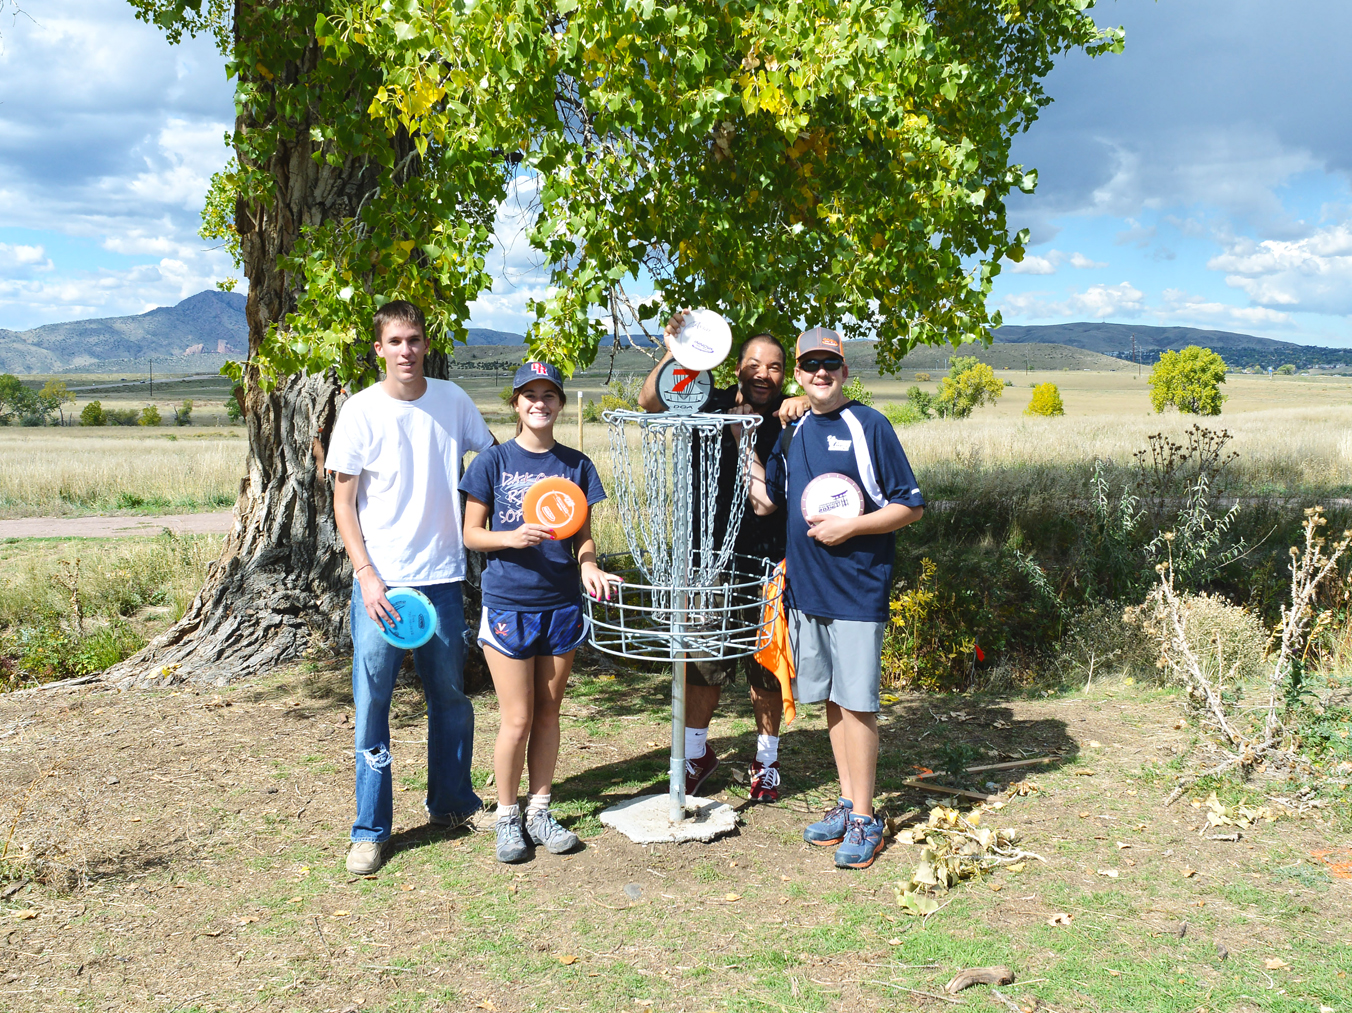 People playing disc golf, holding discs near a basket at Fehringer Ranch Park.